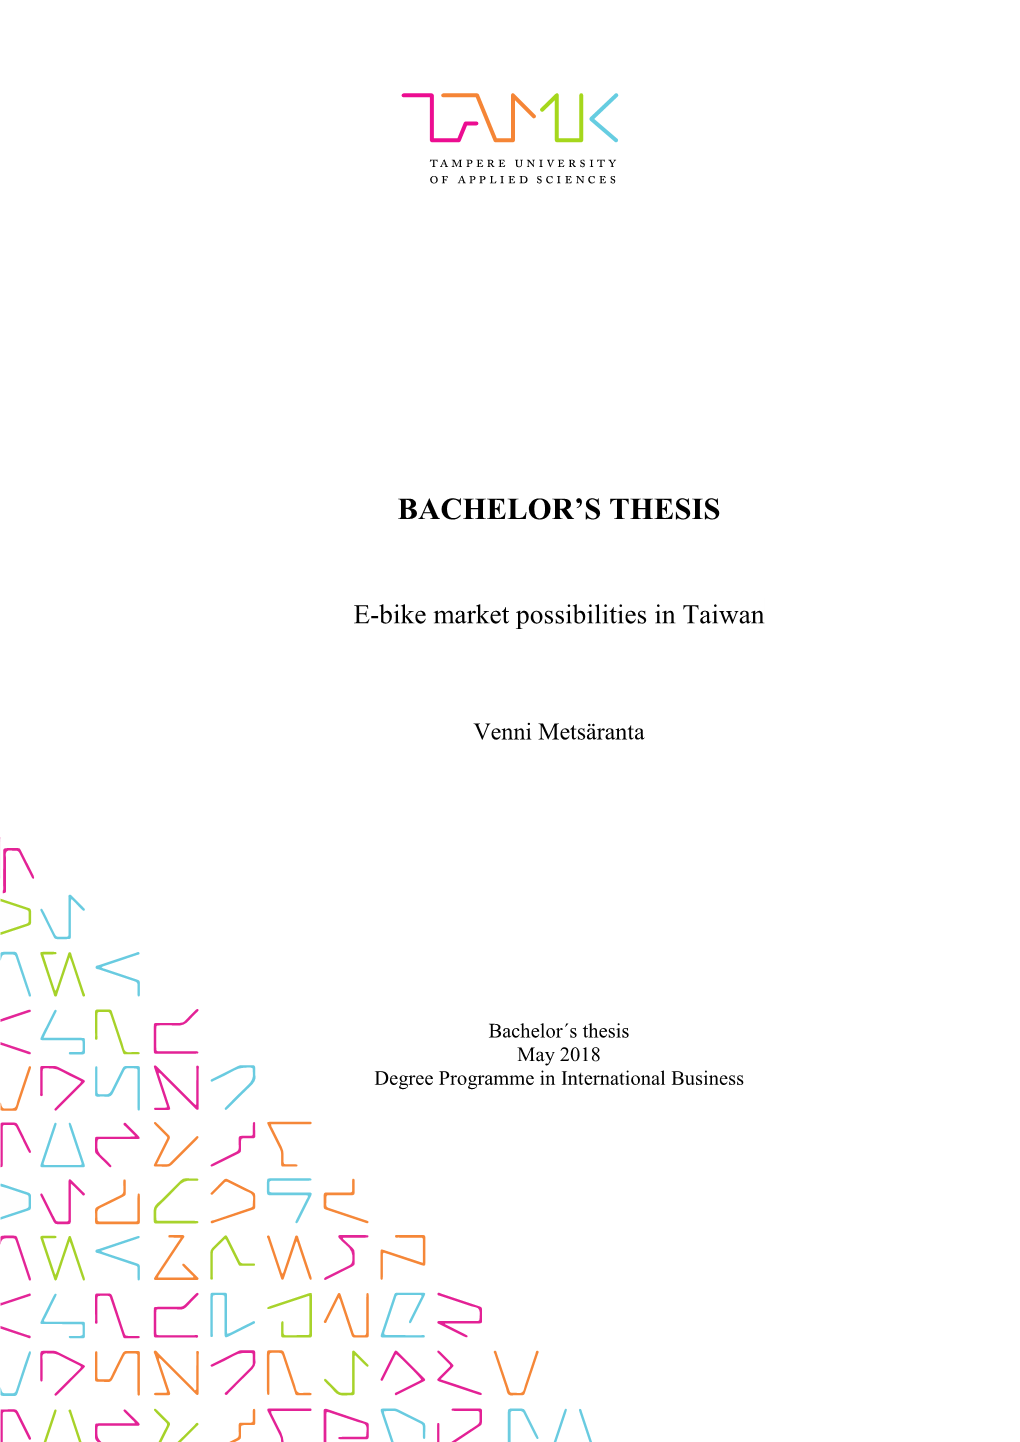 Bachelor's Thesis 86 Pages, Appendices 15 Pages May 2018